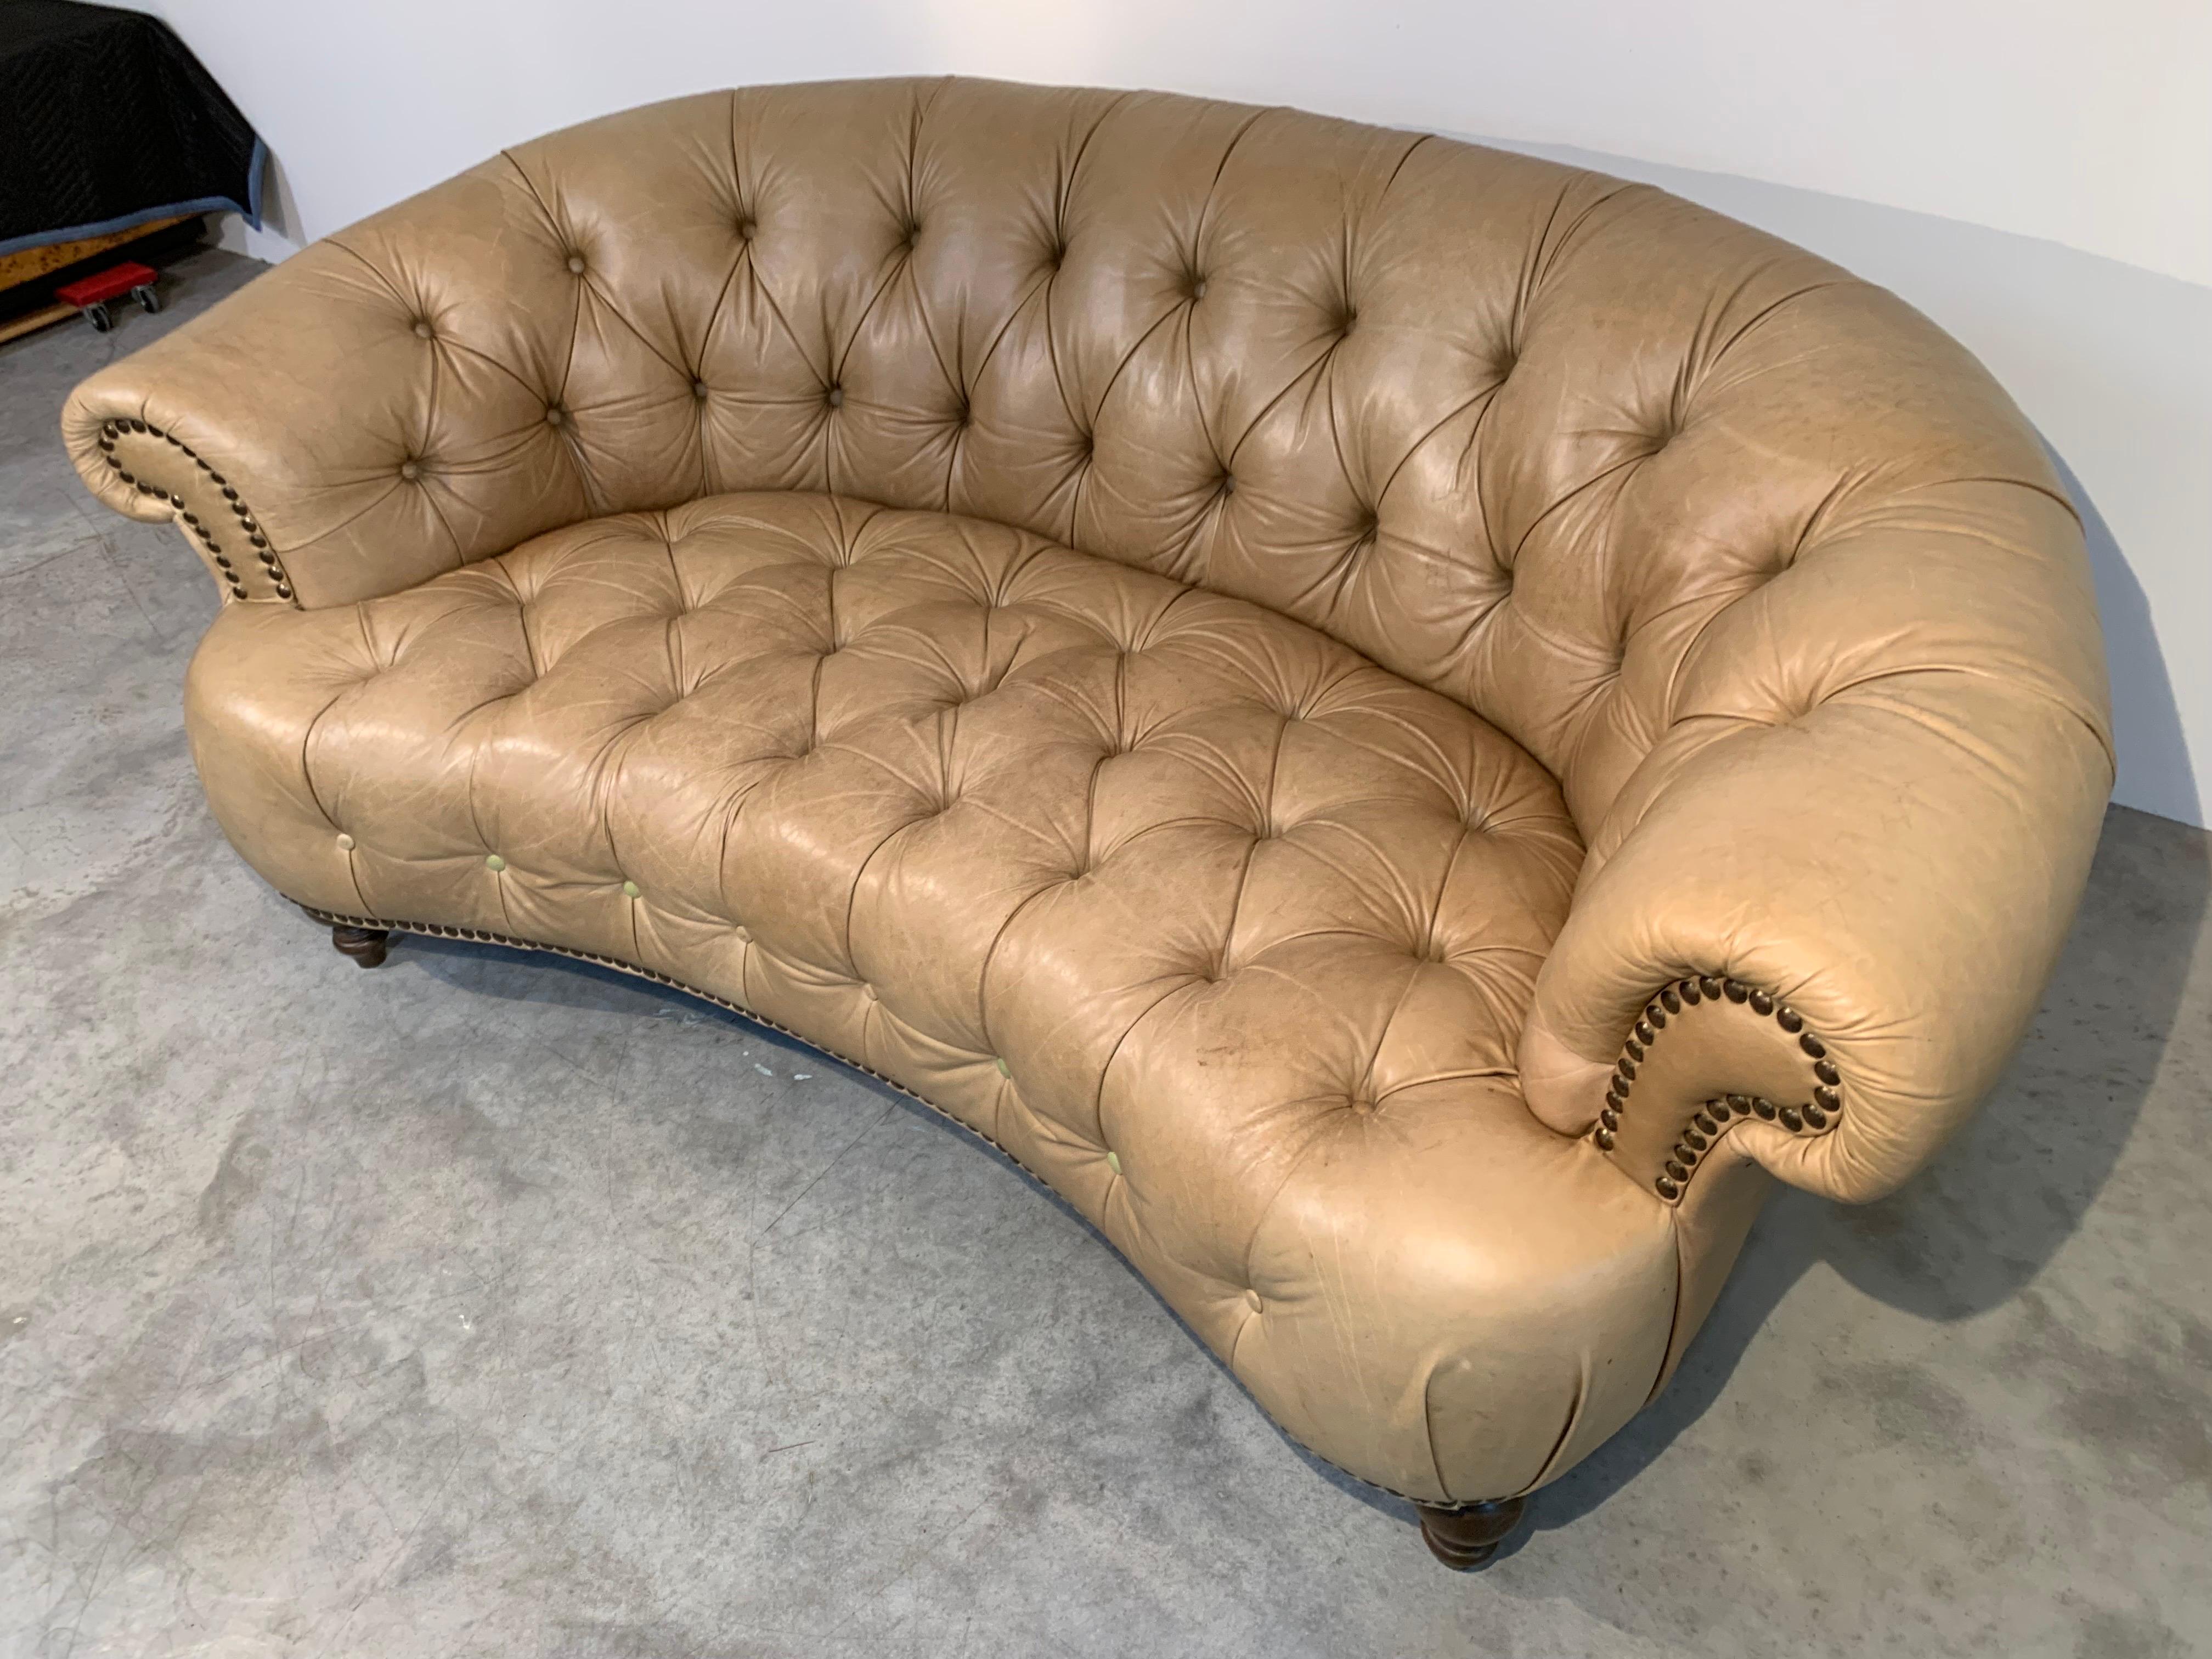 Sculptural Curved Tufted Leather Chesterfield Nailhead Sofa Made In Italy 1